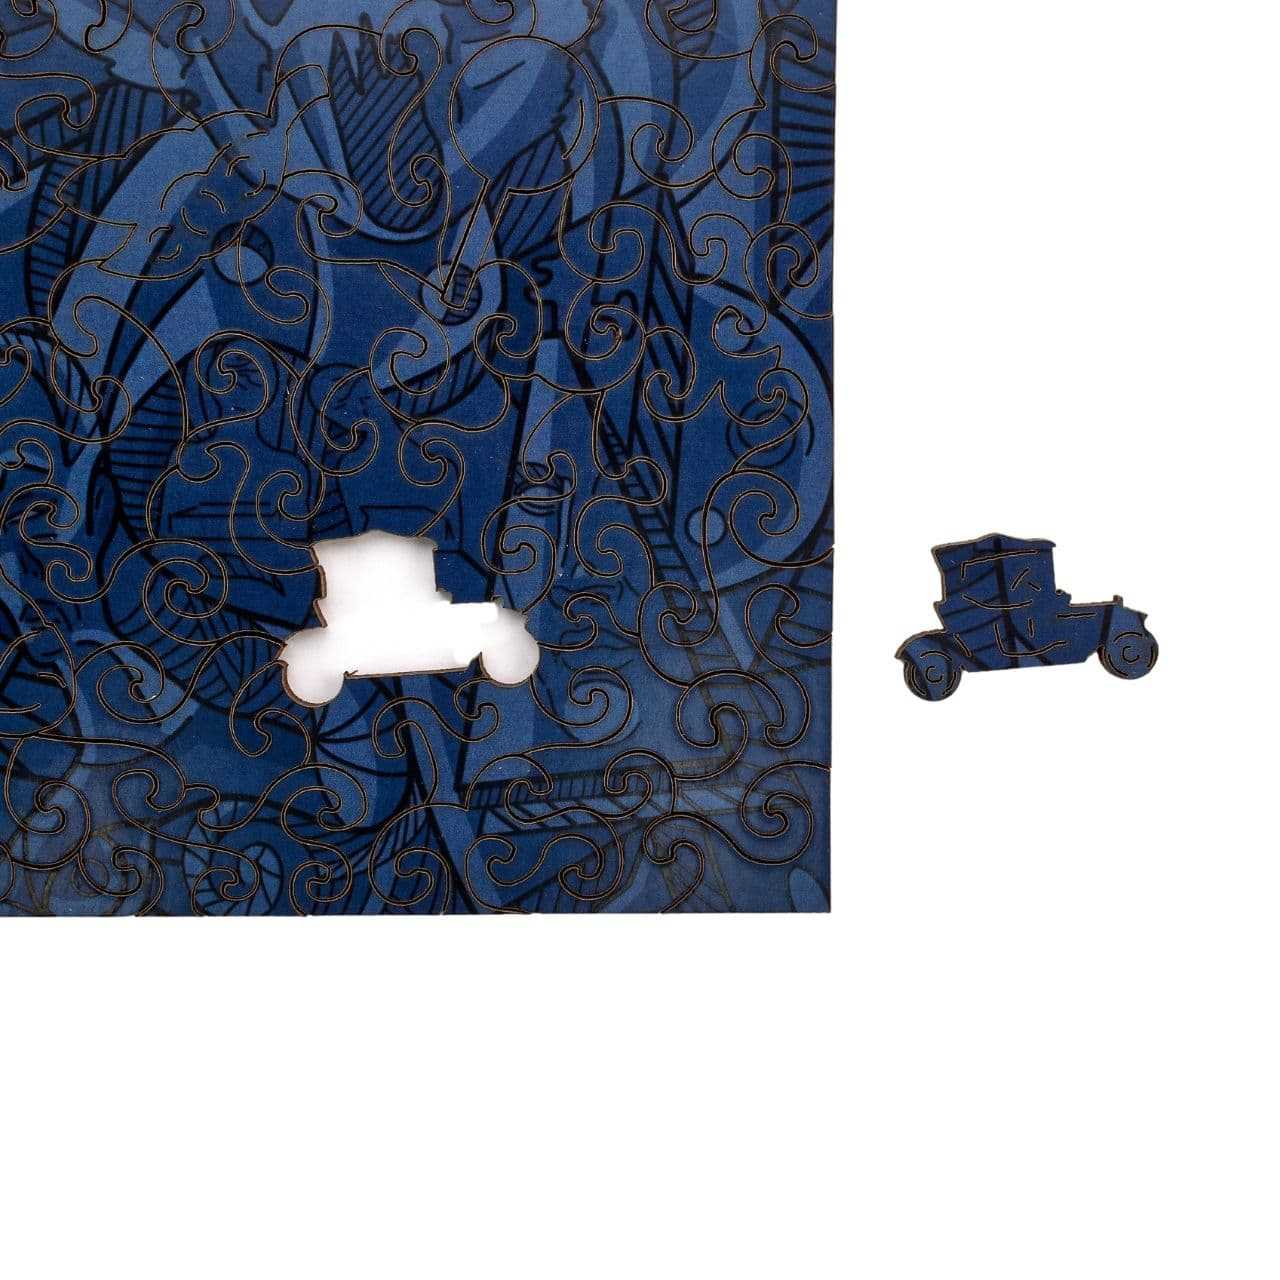 Missing piece of Salvador Dalí wooden puzzles